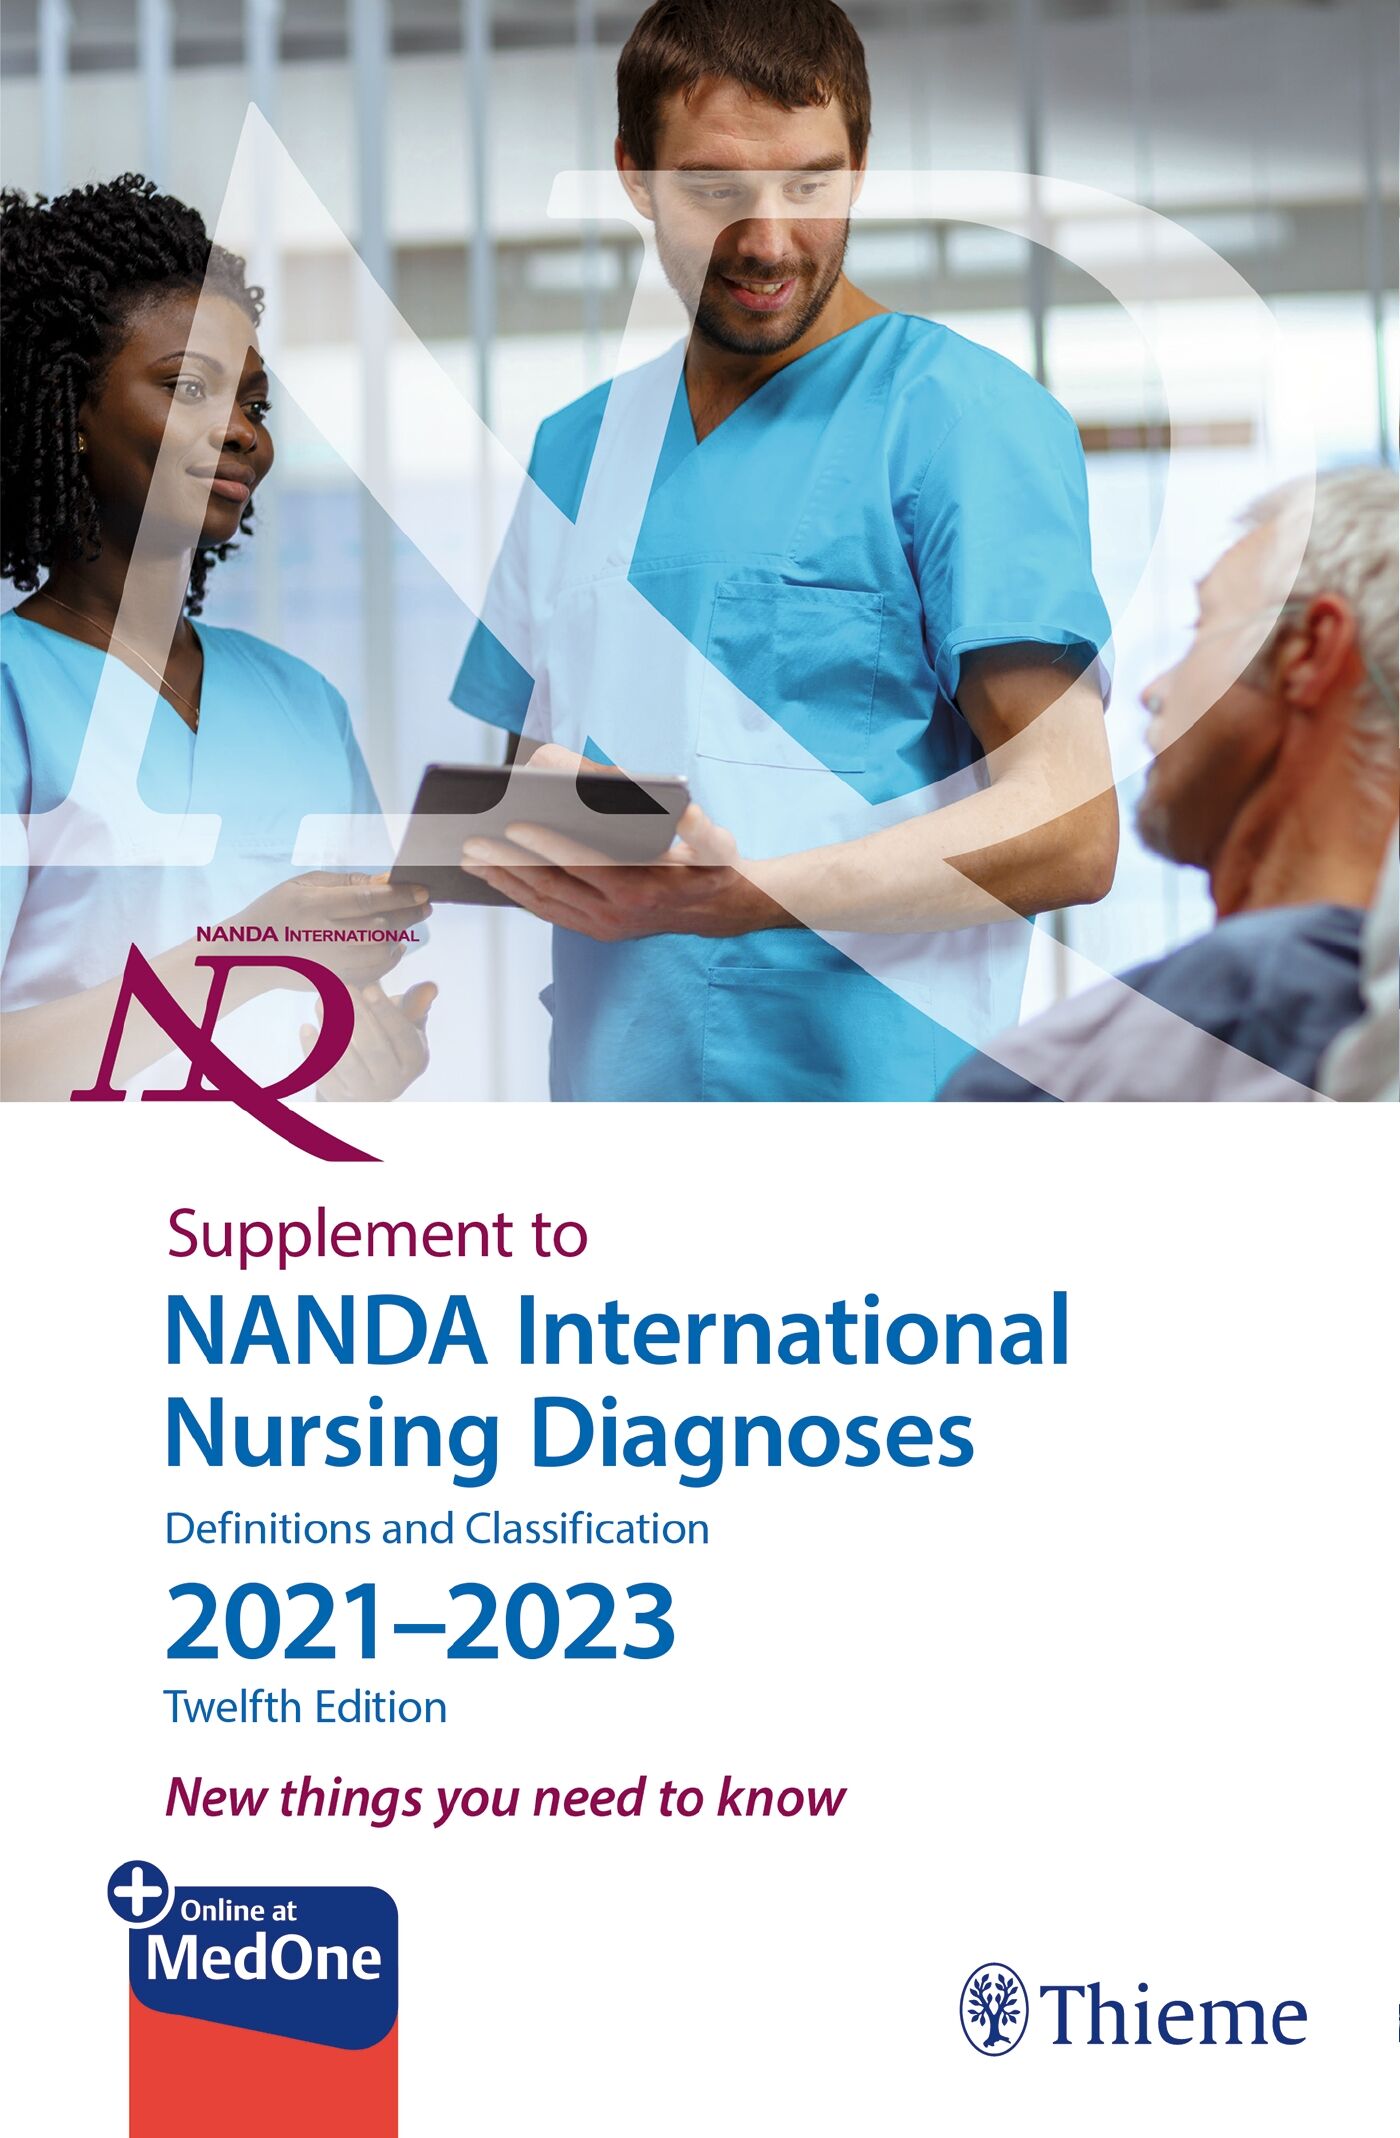 Supplement to NANDA International Nursing Diagnoses: Definitions and Classification 2021-2023 (12th edition), 9781684205837